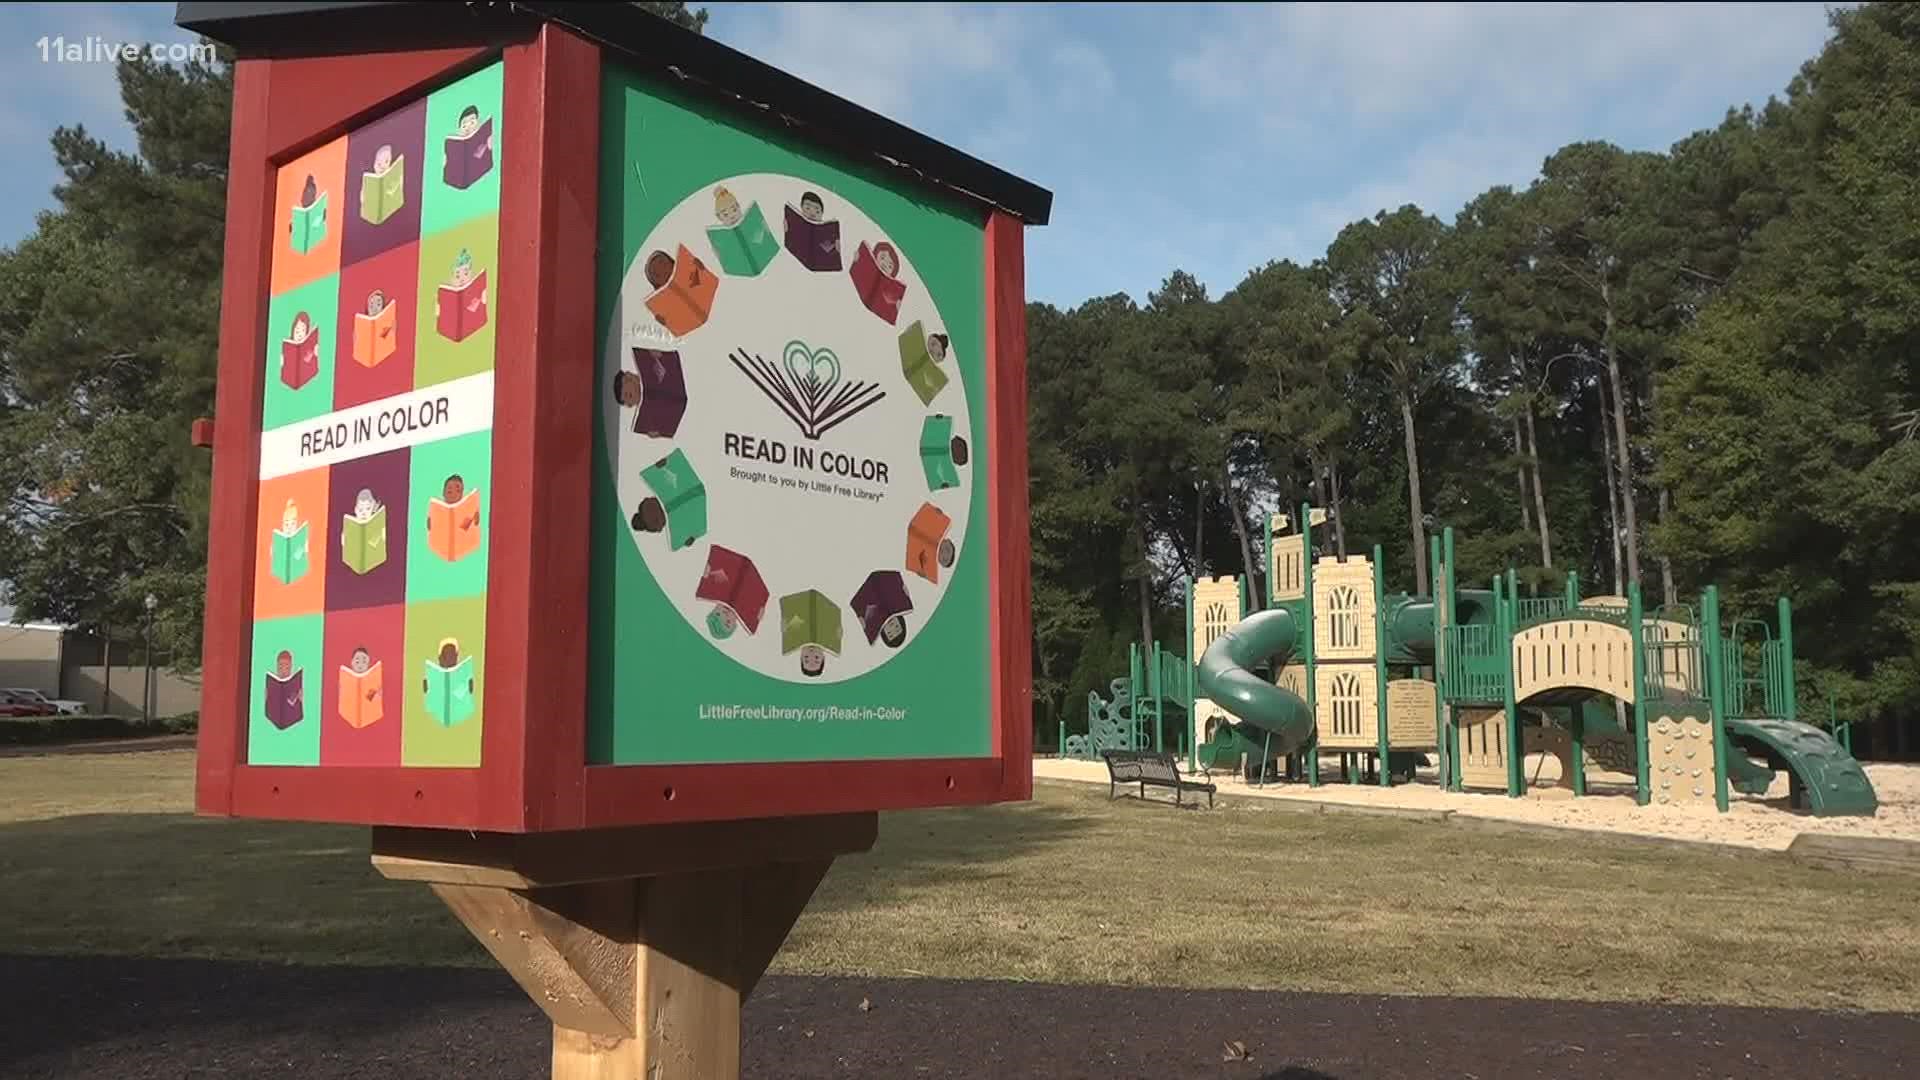 The program will establish 20 new Little Free Libraries with more than 3,500 diverse titles.